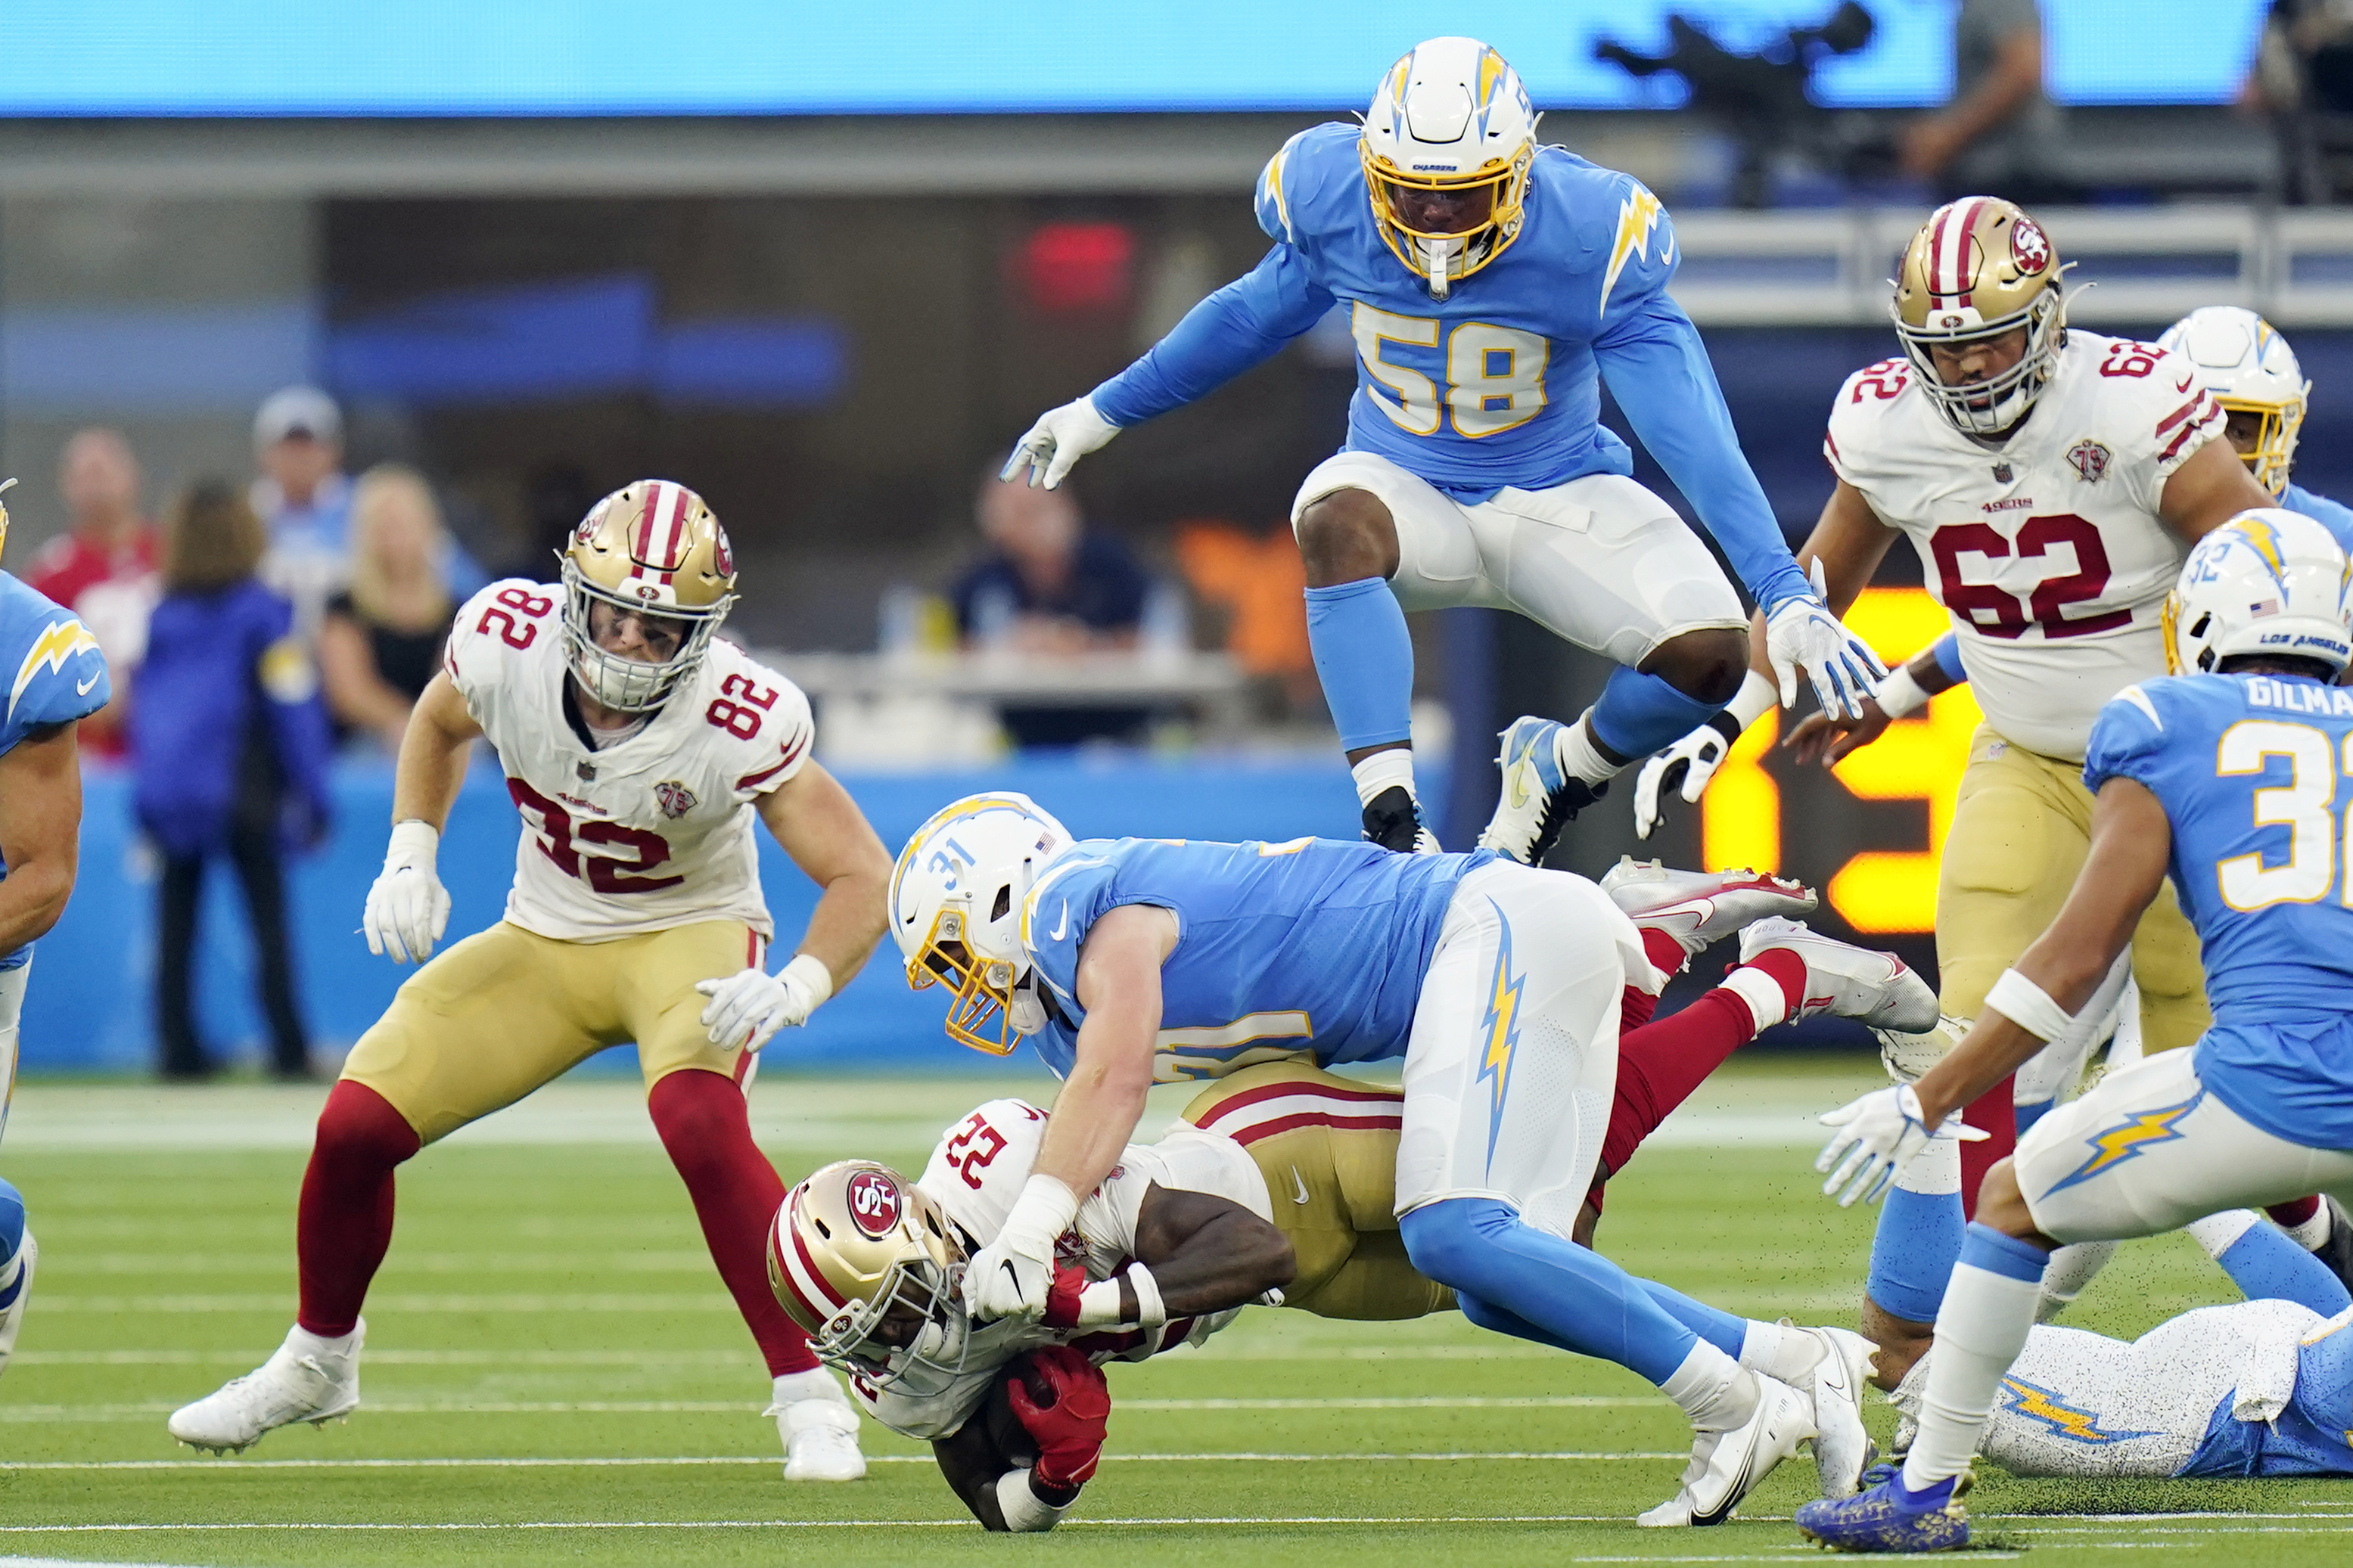 Chargers vs 49ers Predictions, Picks and Odds